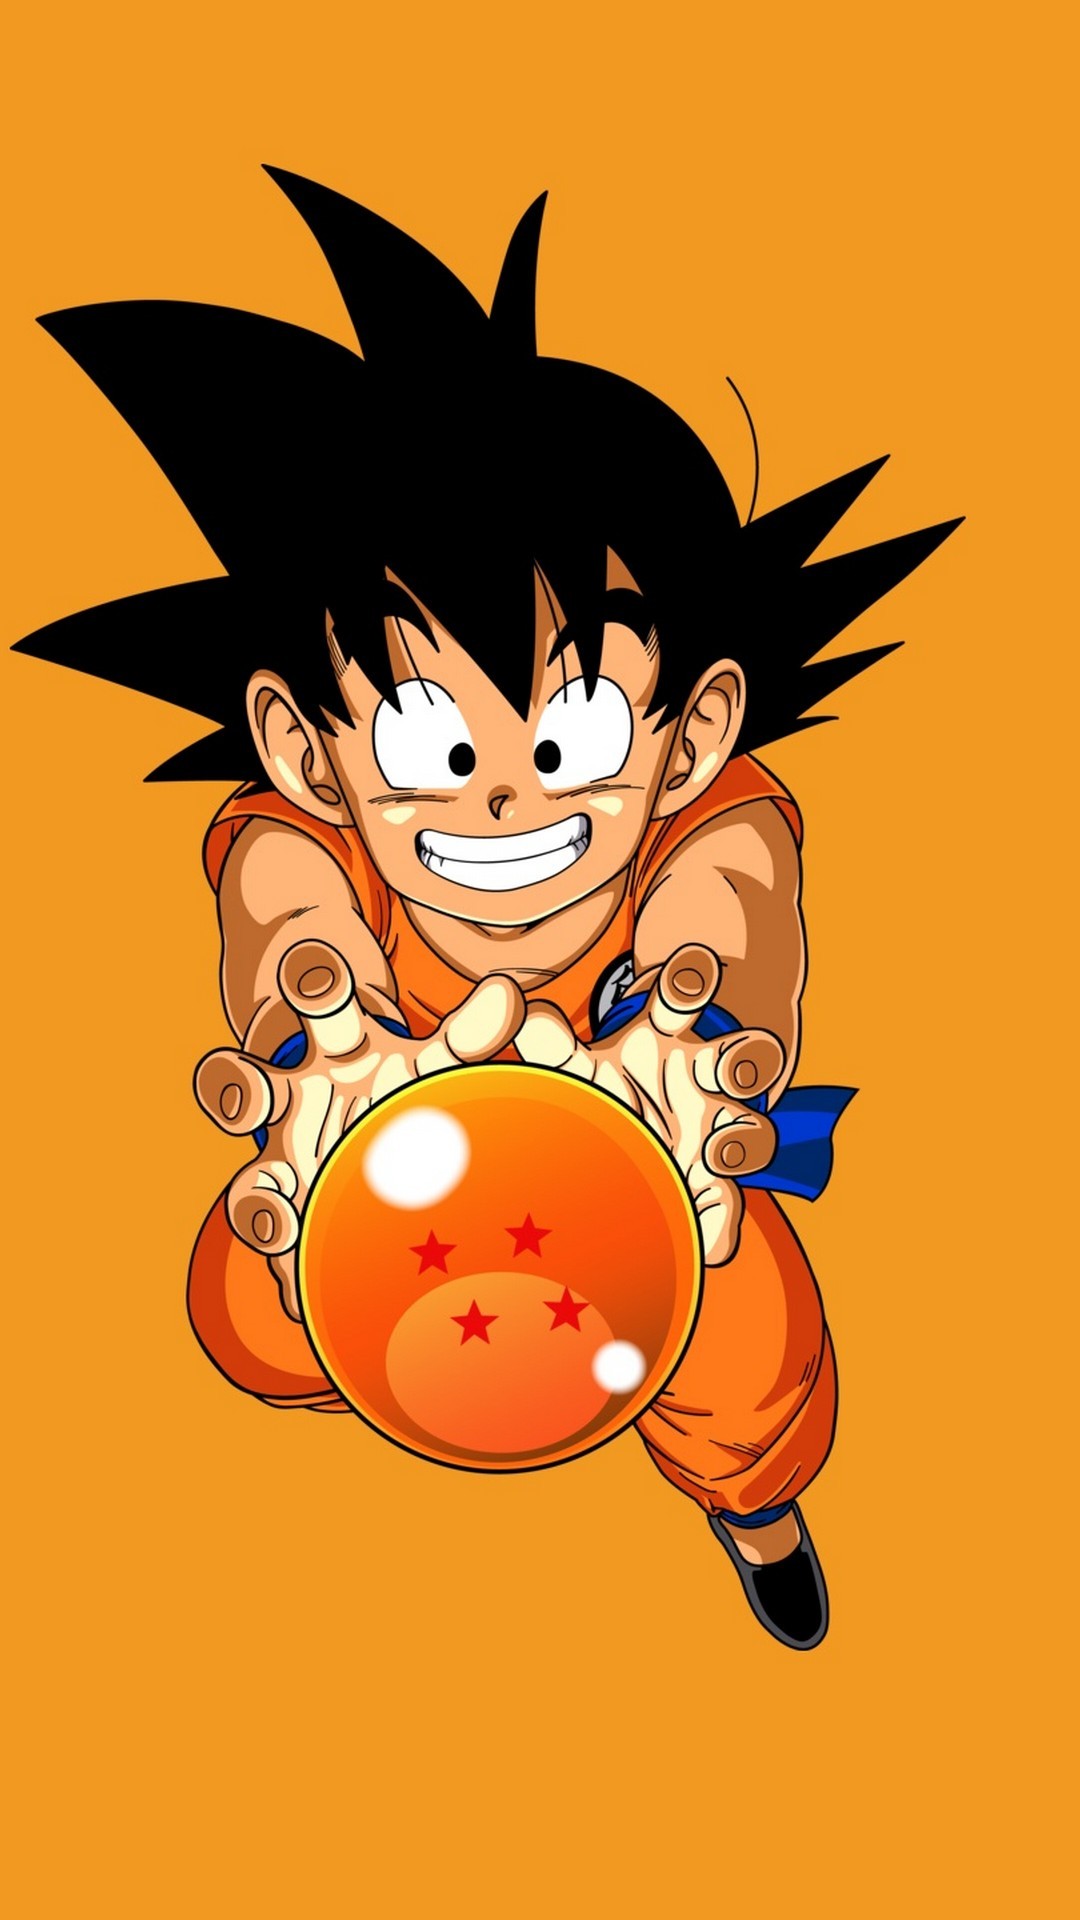 Kid Goku iPhone Wallpaper with resolution 1080X1920 pixel. You can make this wallpaper for your iPhone 5, 6, 7, 8, X backgrounds, Mobile Screensaver, or iPad Lock Screen